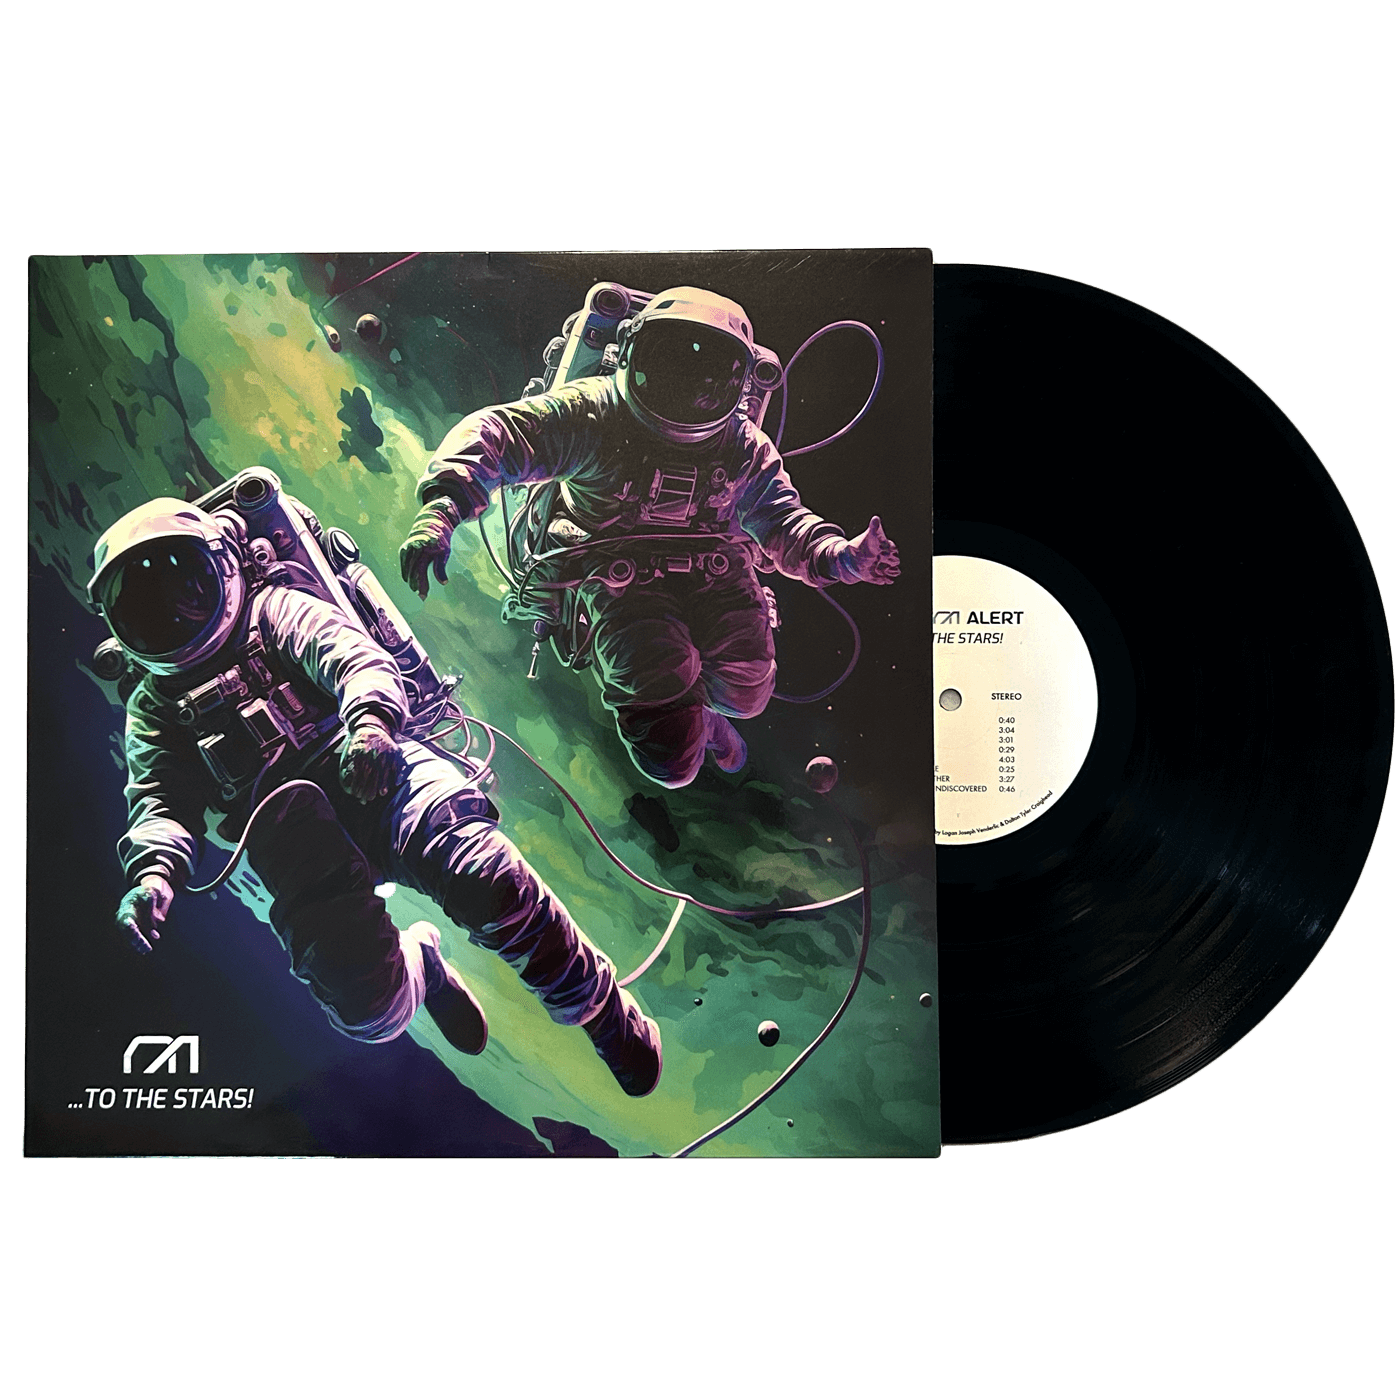 Nerd Alert's vinyl and vinyl cover, showing two realistic spacemen floating in front of a green and purple galaxy, with the Nerd Alert logo in the bottom left corner.